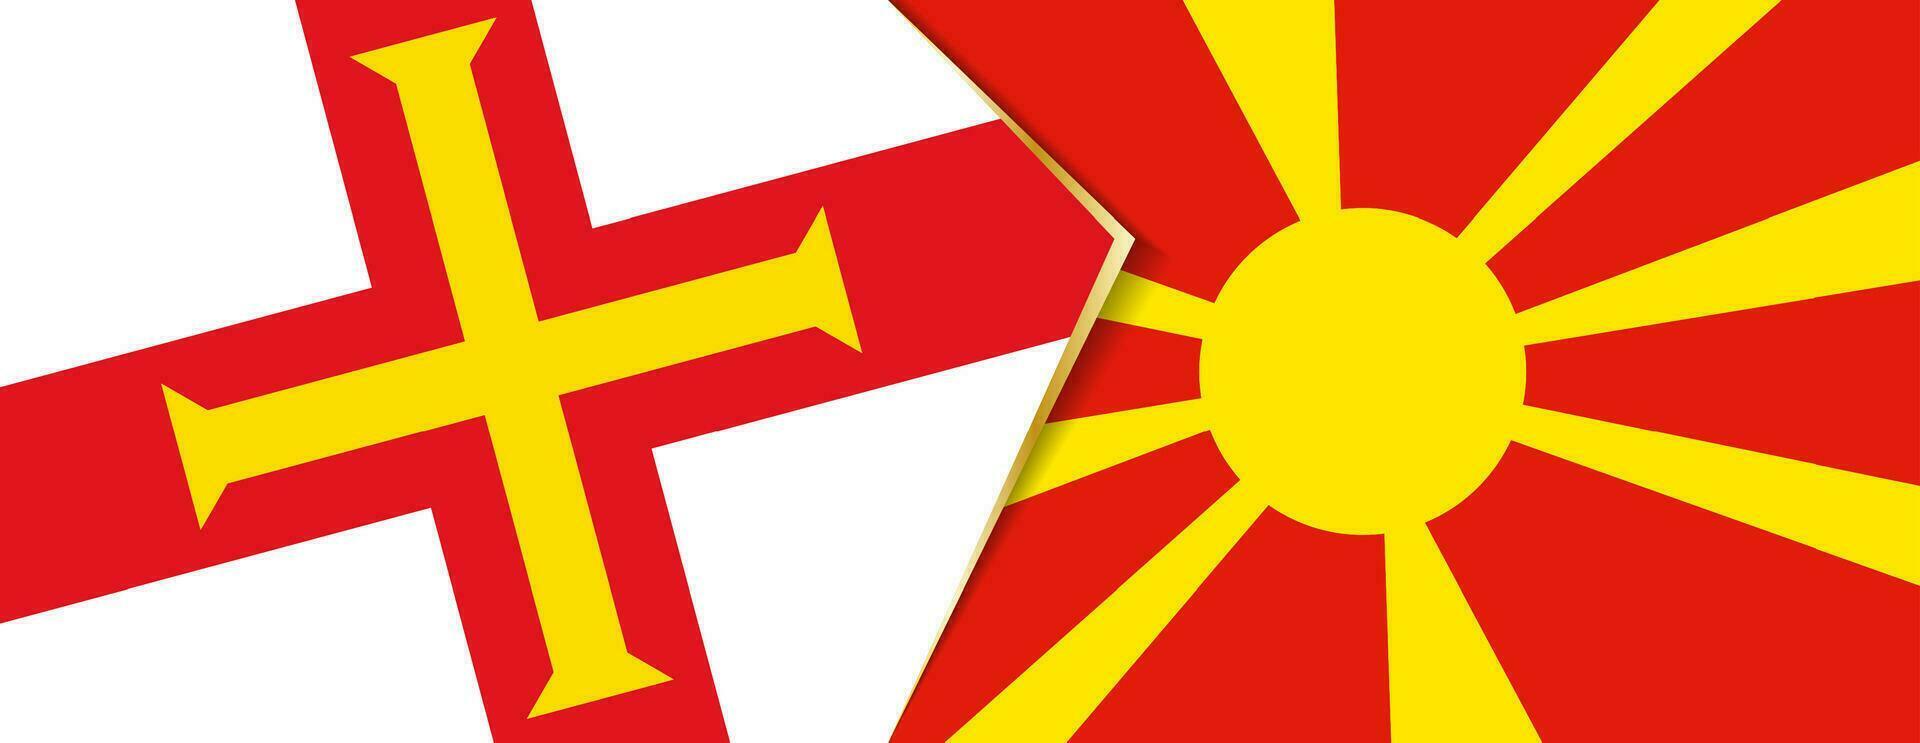 Guernsey and Macedonia flags, two vector flags.